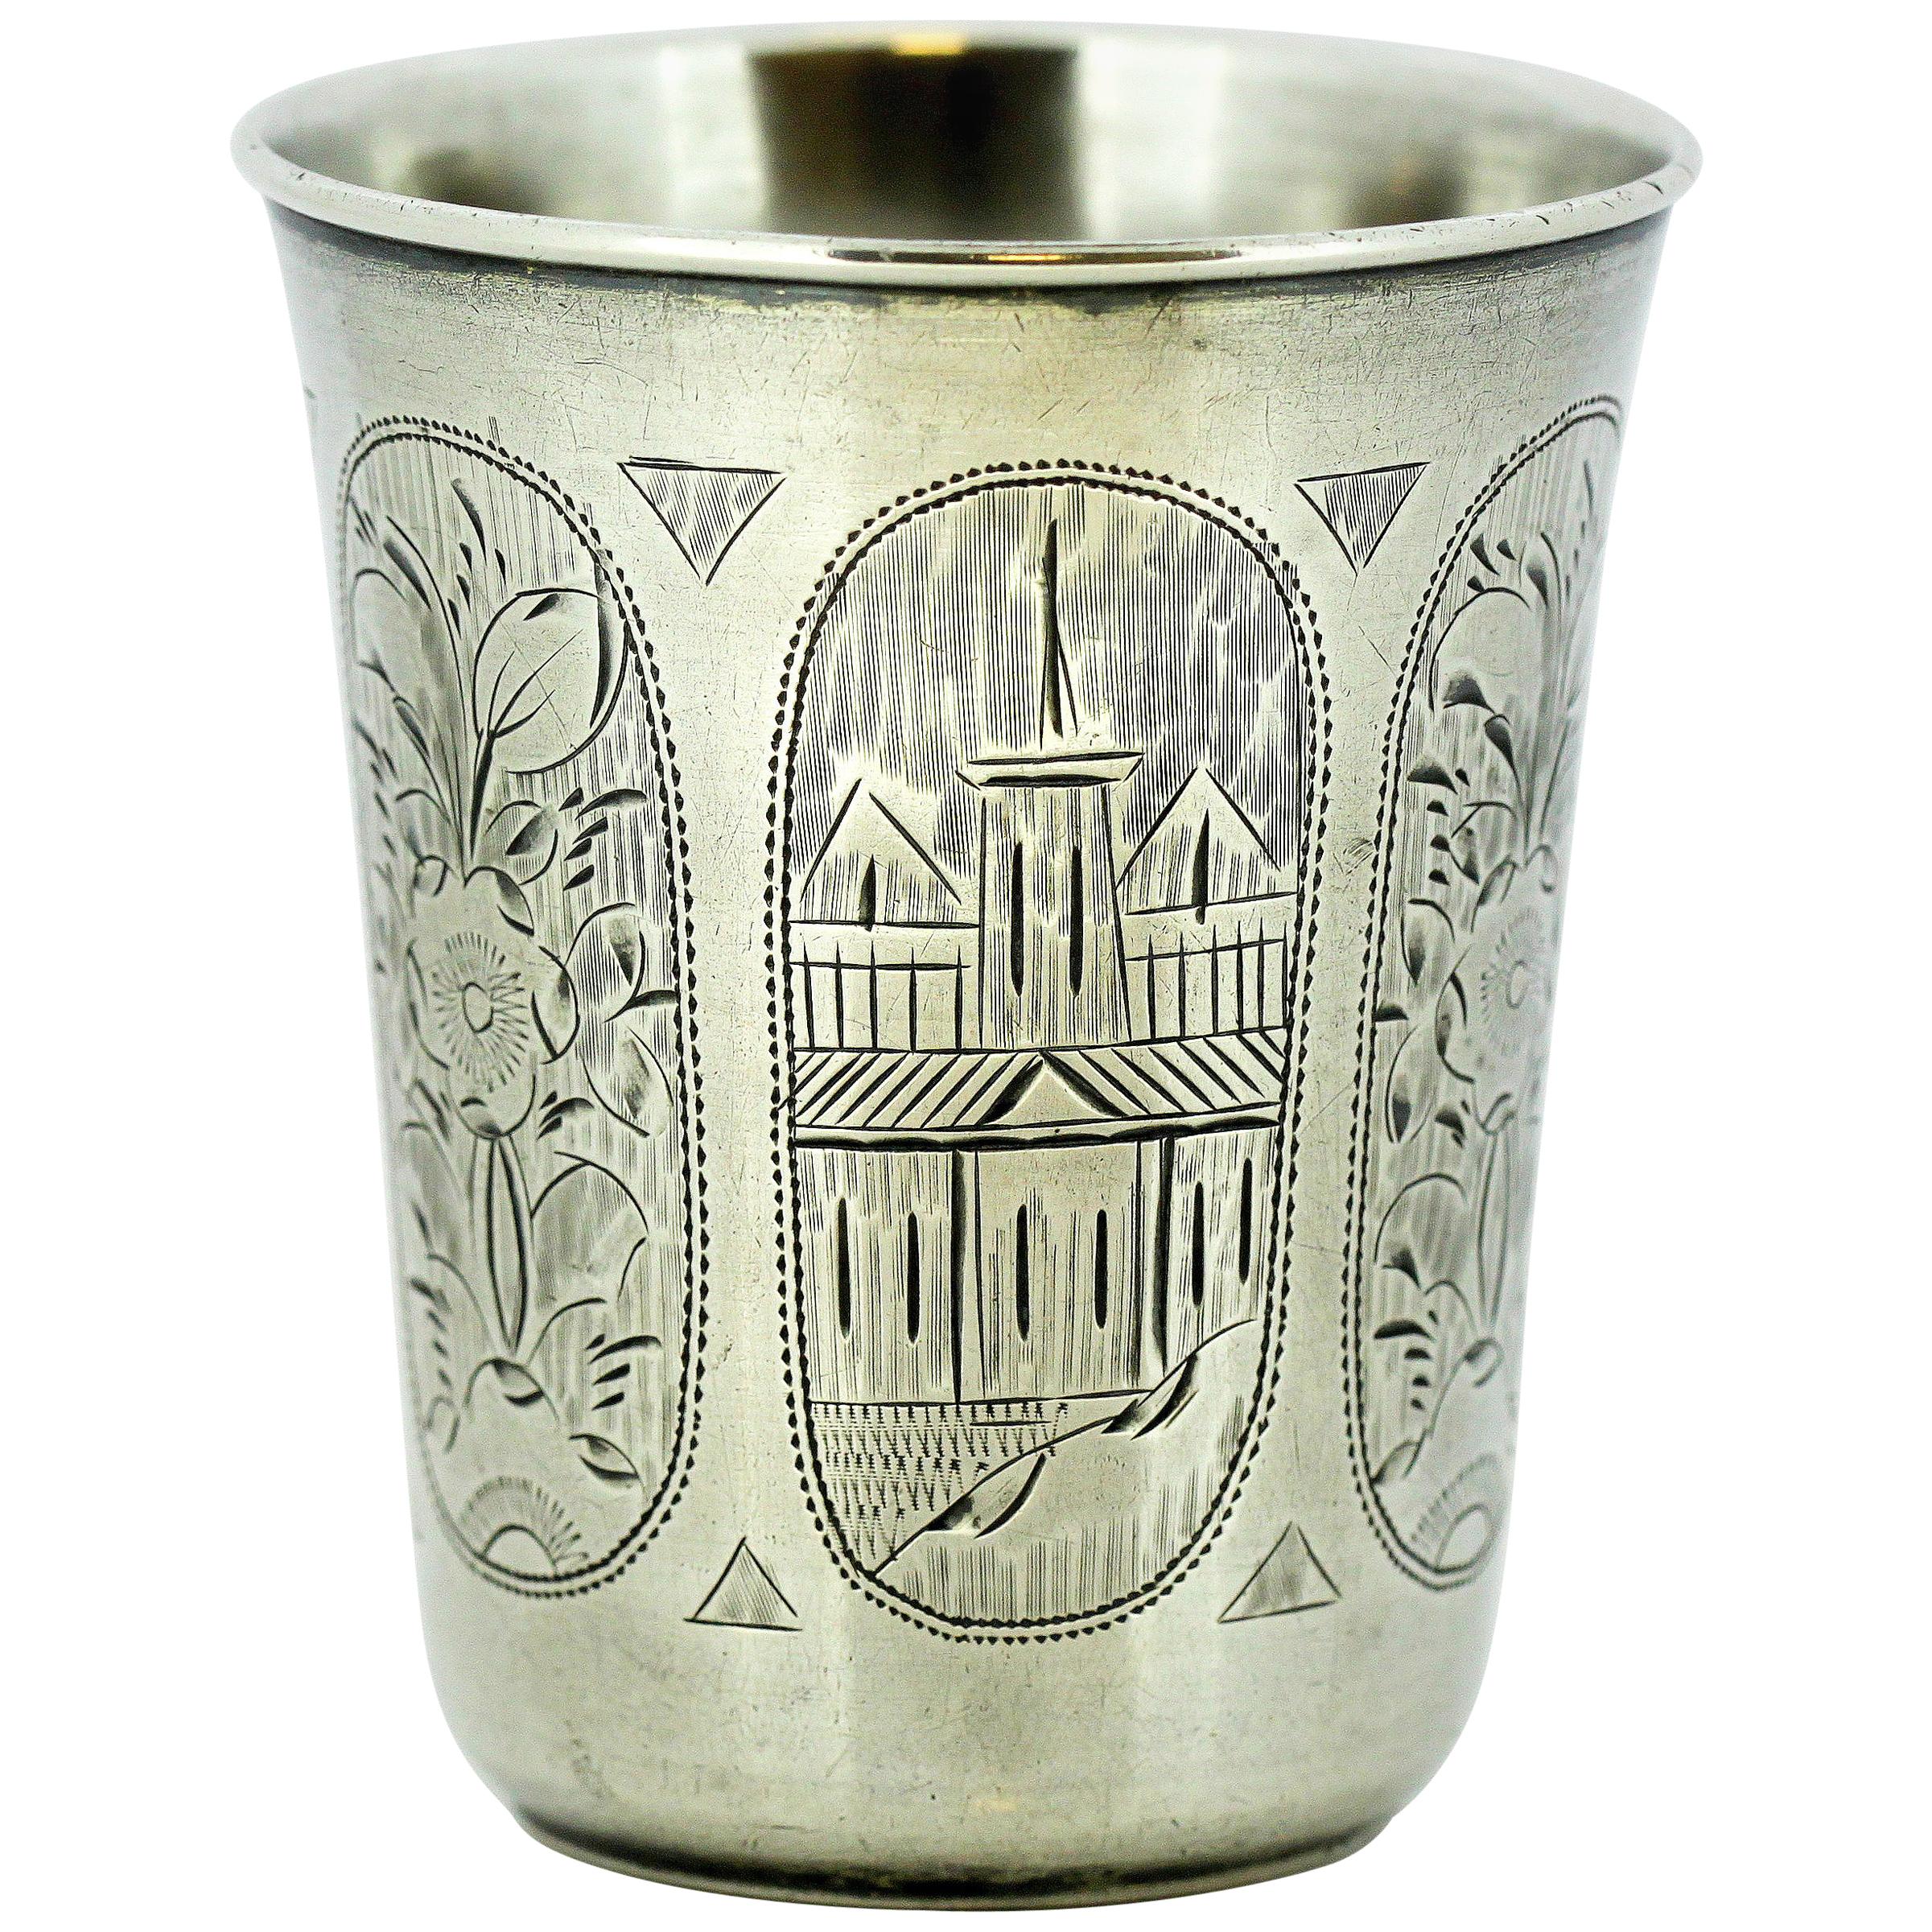 Fine and Impressive Antique Russian Silver Kiddush Cup, by Israel Eseevich